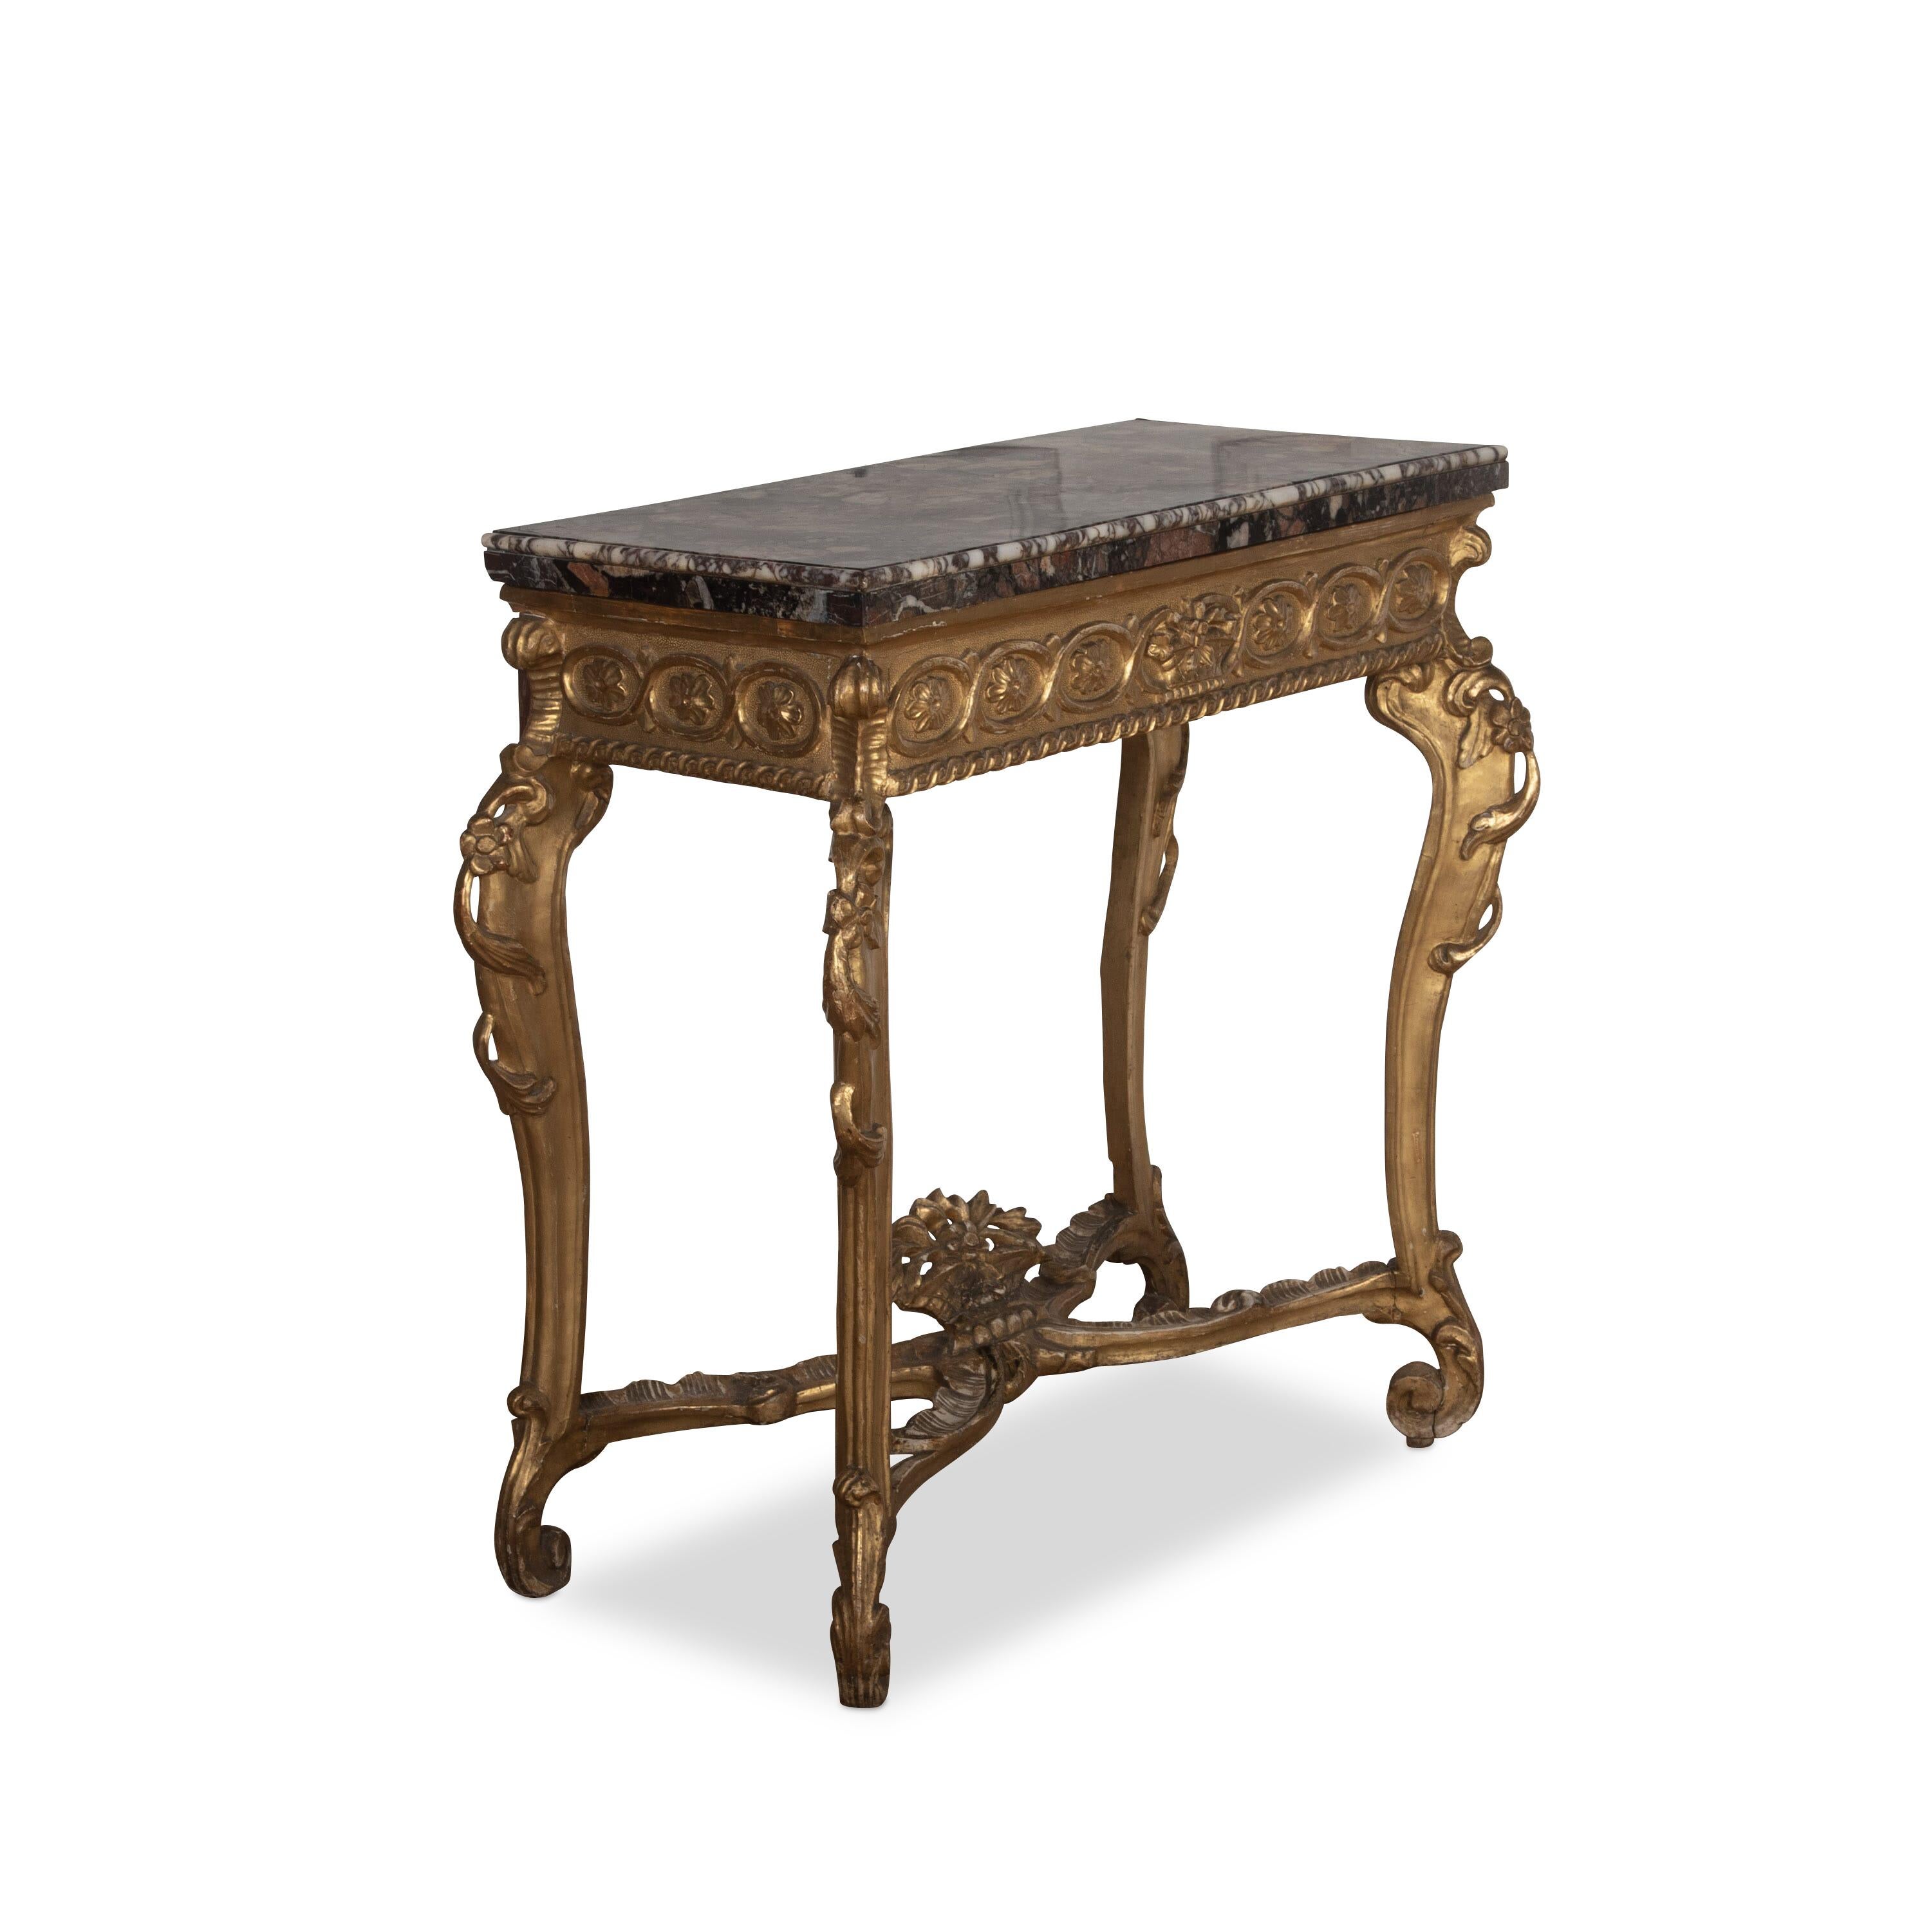 A very smart late 18th Century giltwood console/pier table, with its original rare Breccia marble top with pinched moulded edge. The base elegantly carved with rosettes to the frieze and interlaced centred with a basket of flowers, C scrolls corners